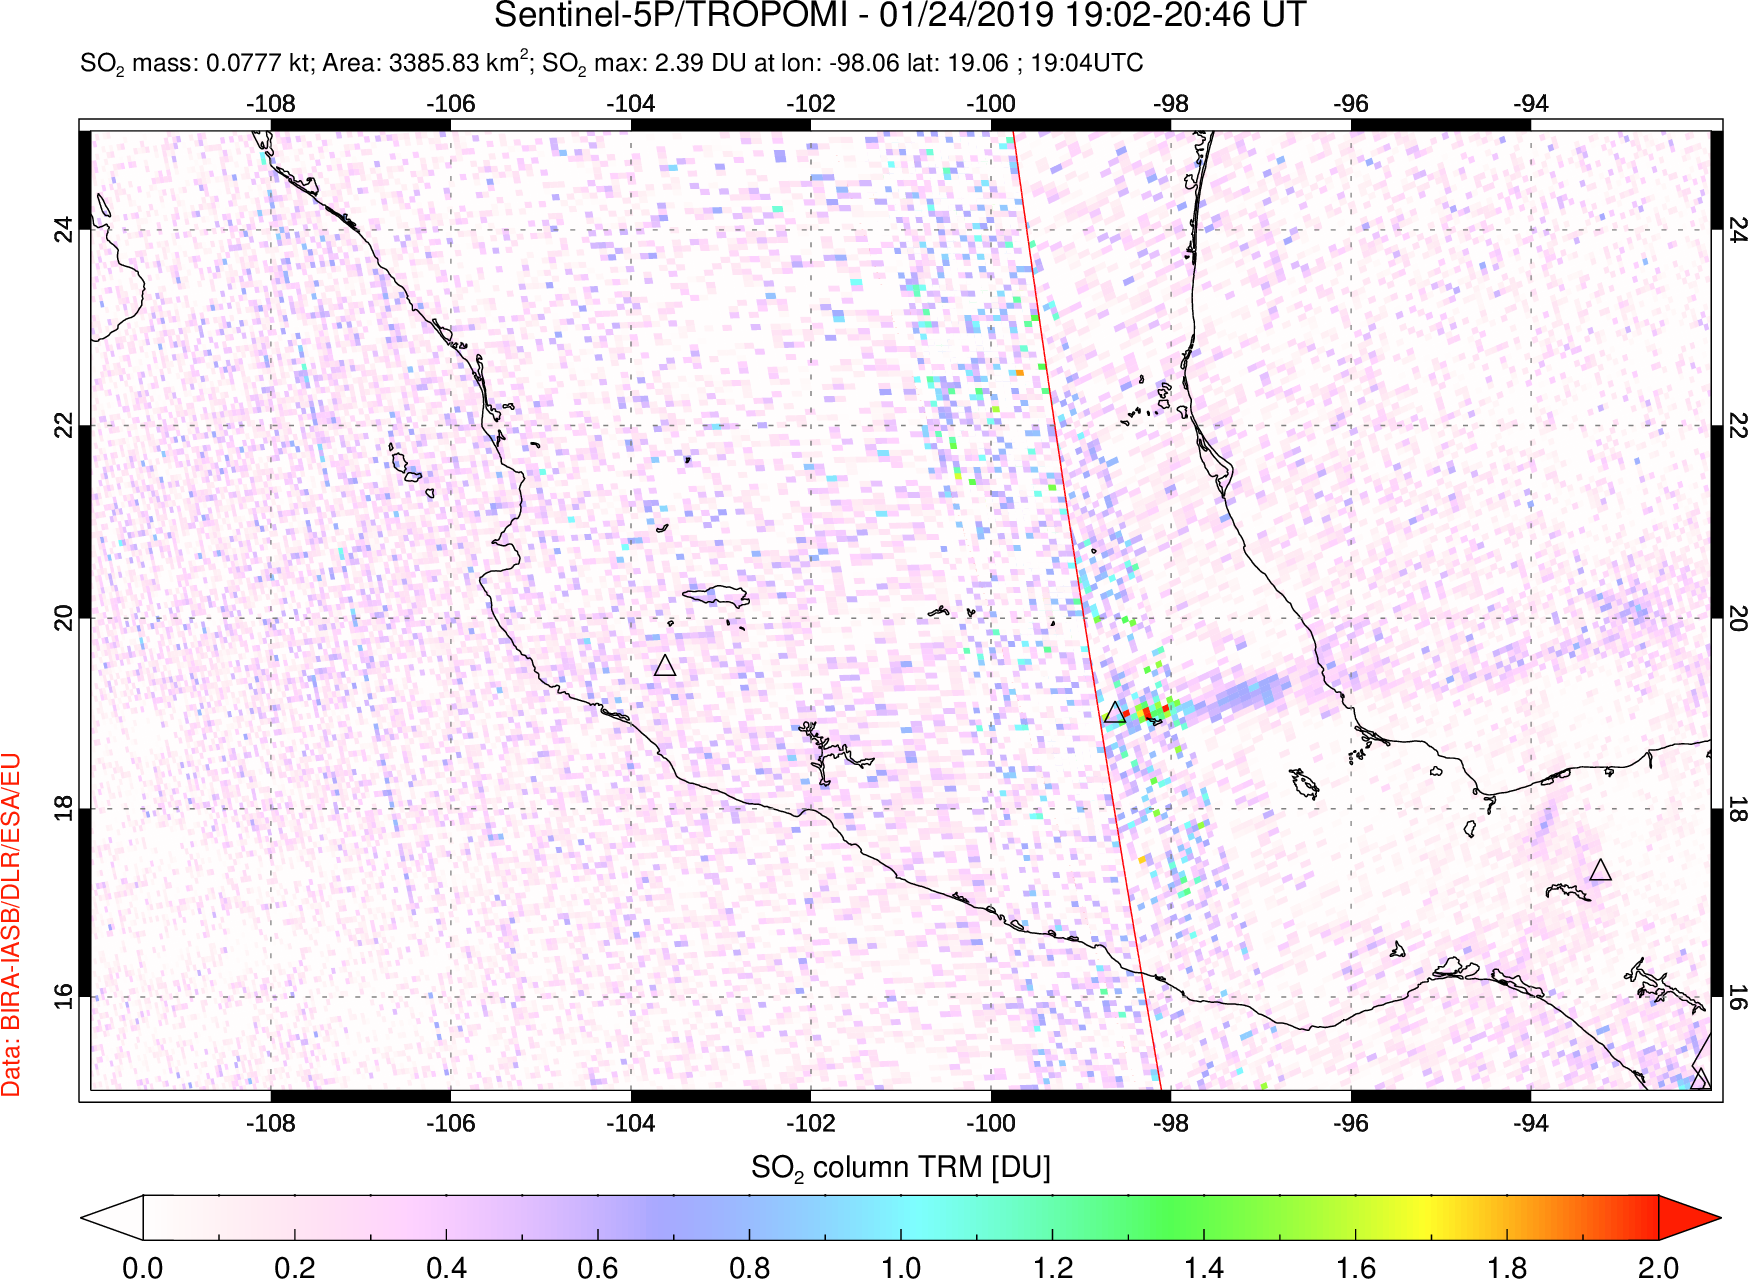 A sulfur dioxide image over Mexico on Jan 24, 2019.